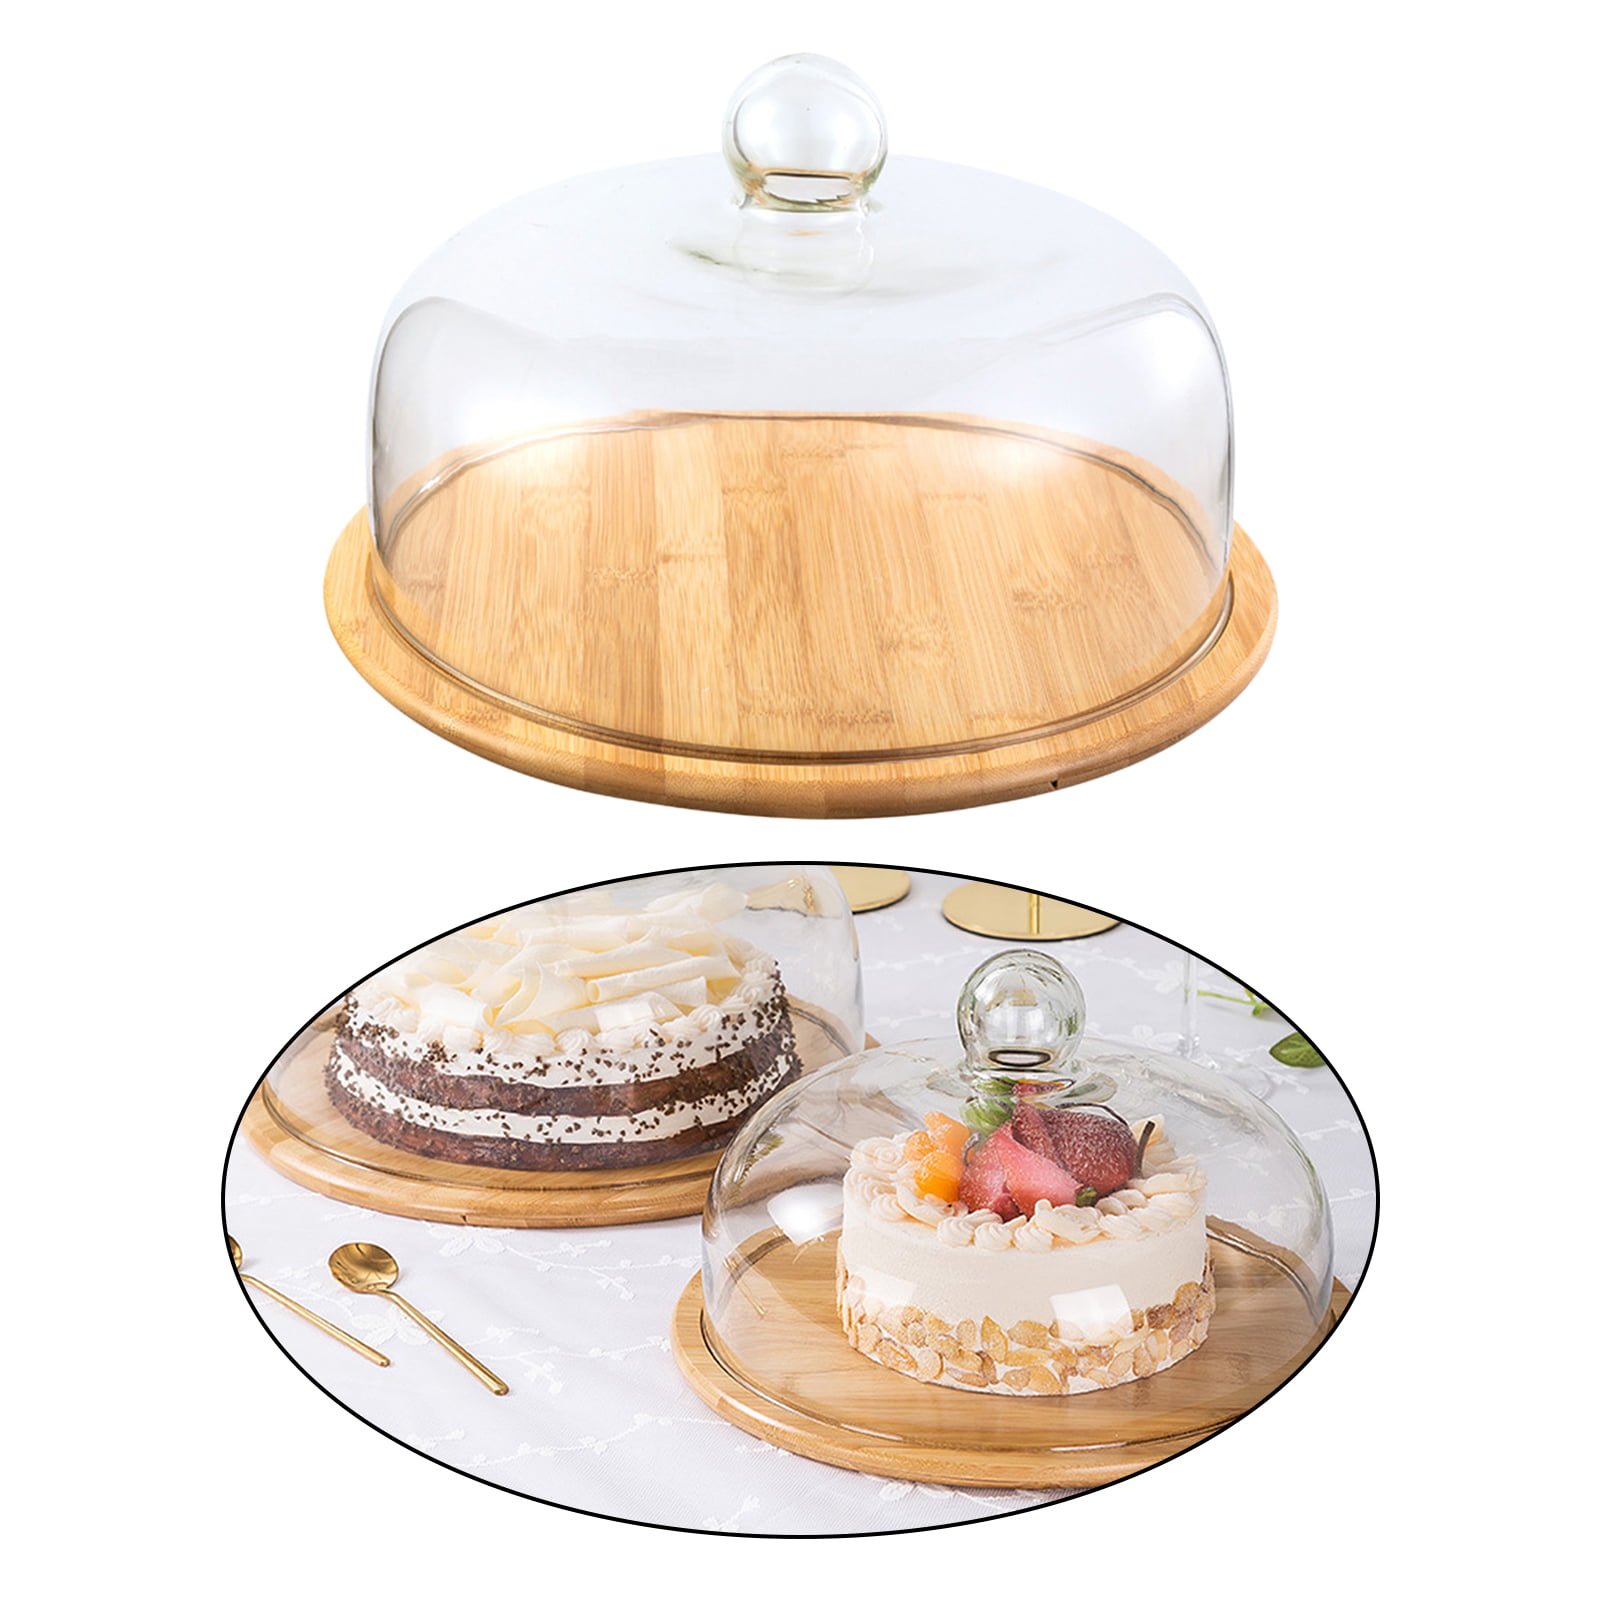 Transparent Glass Cake Pan Tall Feet Cake Stand Glass Cover Bread Pan  Dessert Plate Decorative Display